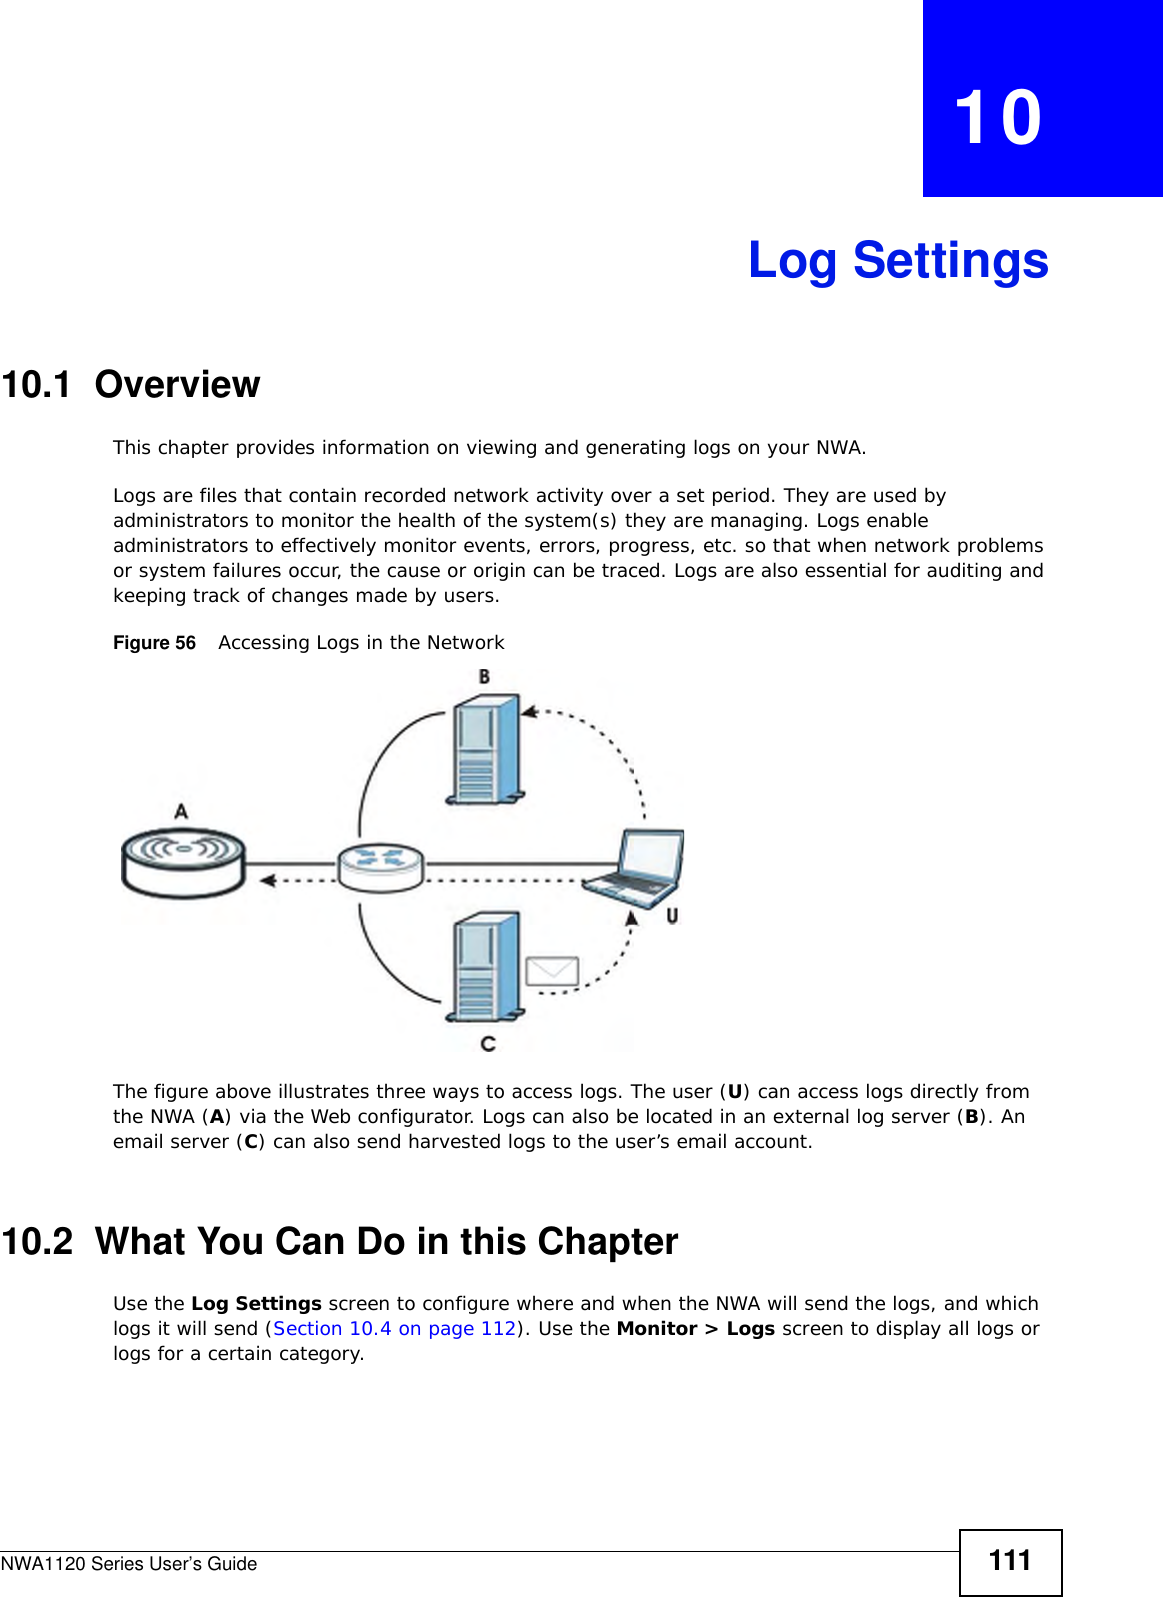 NWA1120 Series User’s Guide 111CHAPTER   10Log Settings10.1  OverviewThis chapter provides information on viewing and generating logs on your NWA.Logs are files that contain recorded network activity over a set period. They are used by administrators to monitor the health of the system(s) they are managing. Logs enable administrators to effectively monitor events, errors, progress, etc. so that when network problems or system failures occur, the cause or origin can be traced. Logs are also essential for auditing and keeping track of changes made by users. Figure 56    Accessing Logs in the NetworkThe figure above illustrates three ways to access logs. The user (U) can access logs directly from the NWA (A) via the Web configurator. Logs can also be located in an external log server (B). An email server (C) can also send harvested logs to the user’s email account. 10.2  What You Can Do in this ChapterUse the Log Settings screen to configure where and when the NWA will send the logs, and which logs it will send (Section 10.4 on page 112). Use the Monitor &gt; Logs screen to display all logs or logs for a certain category.